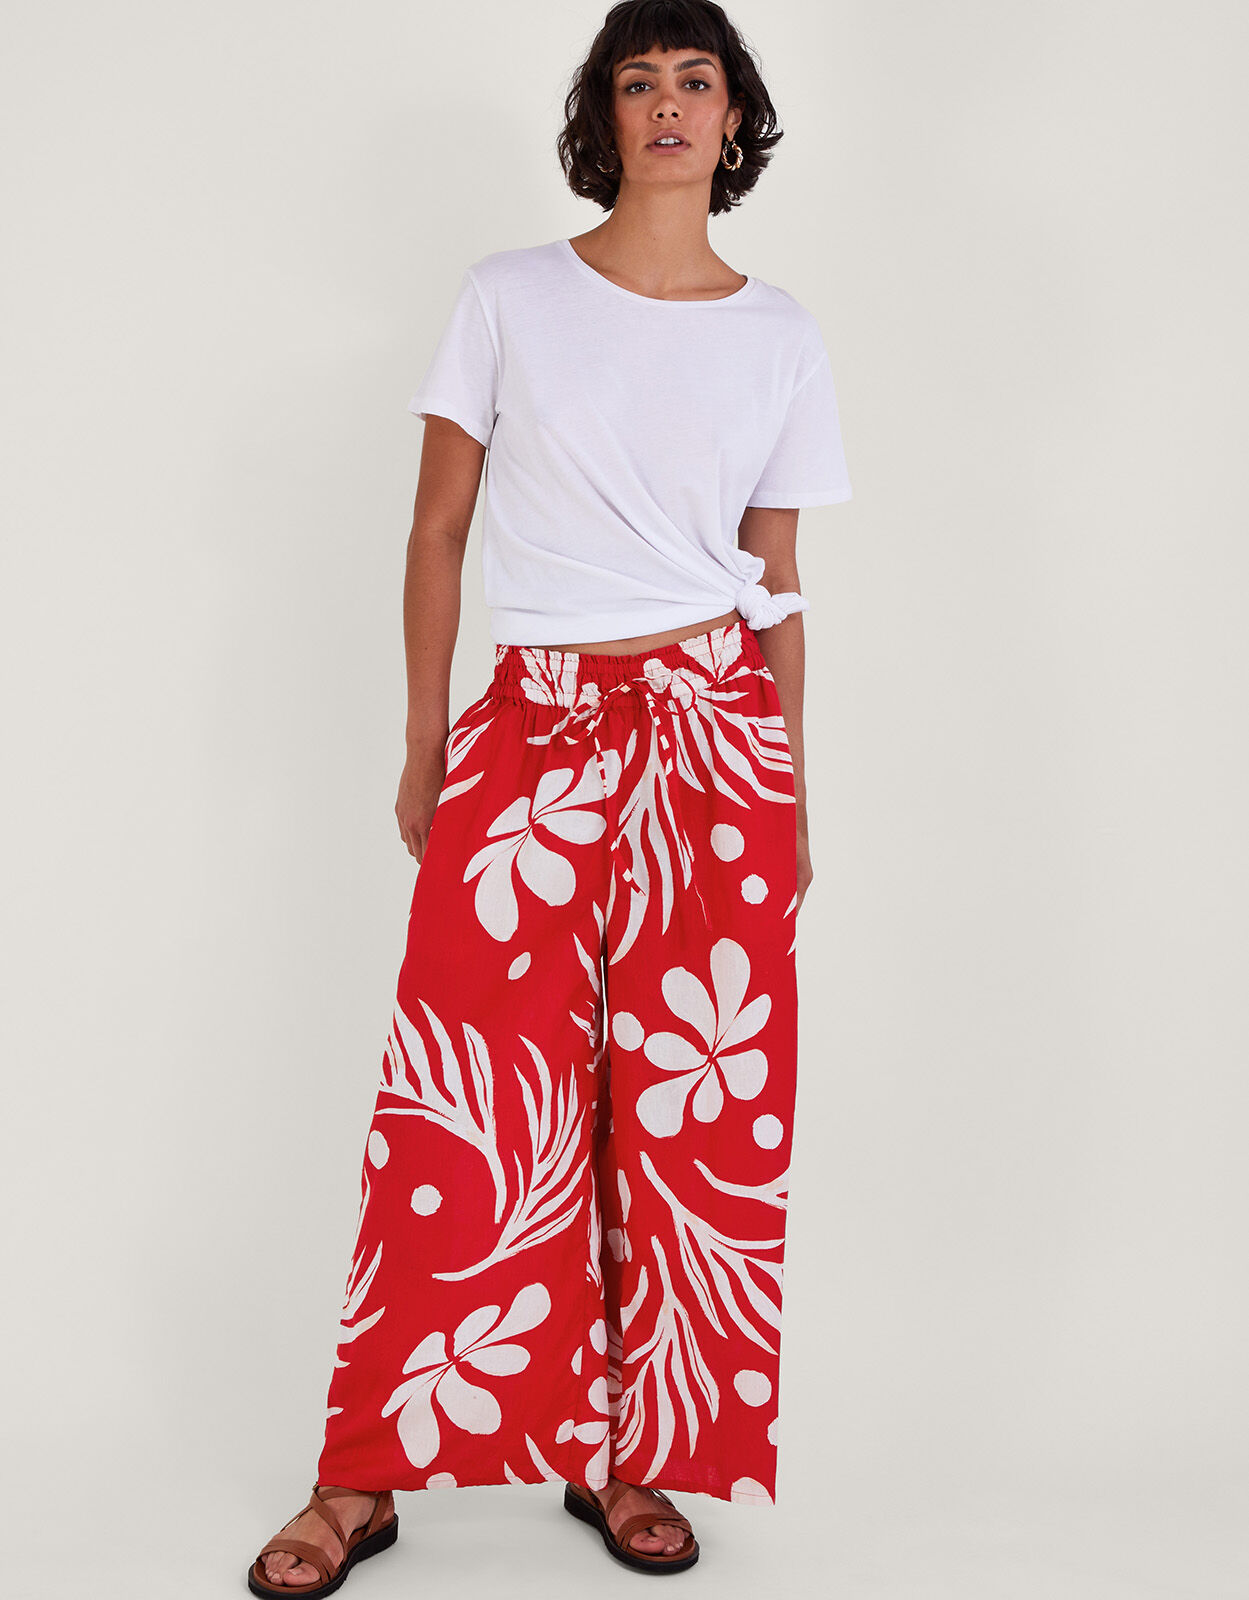 Discover 110+ palm trousers super hot